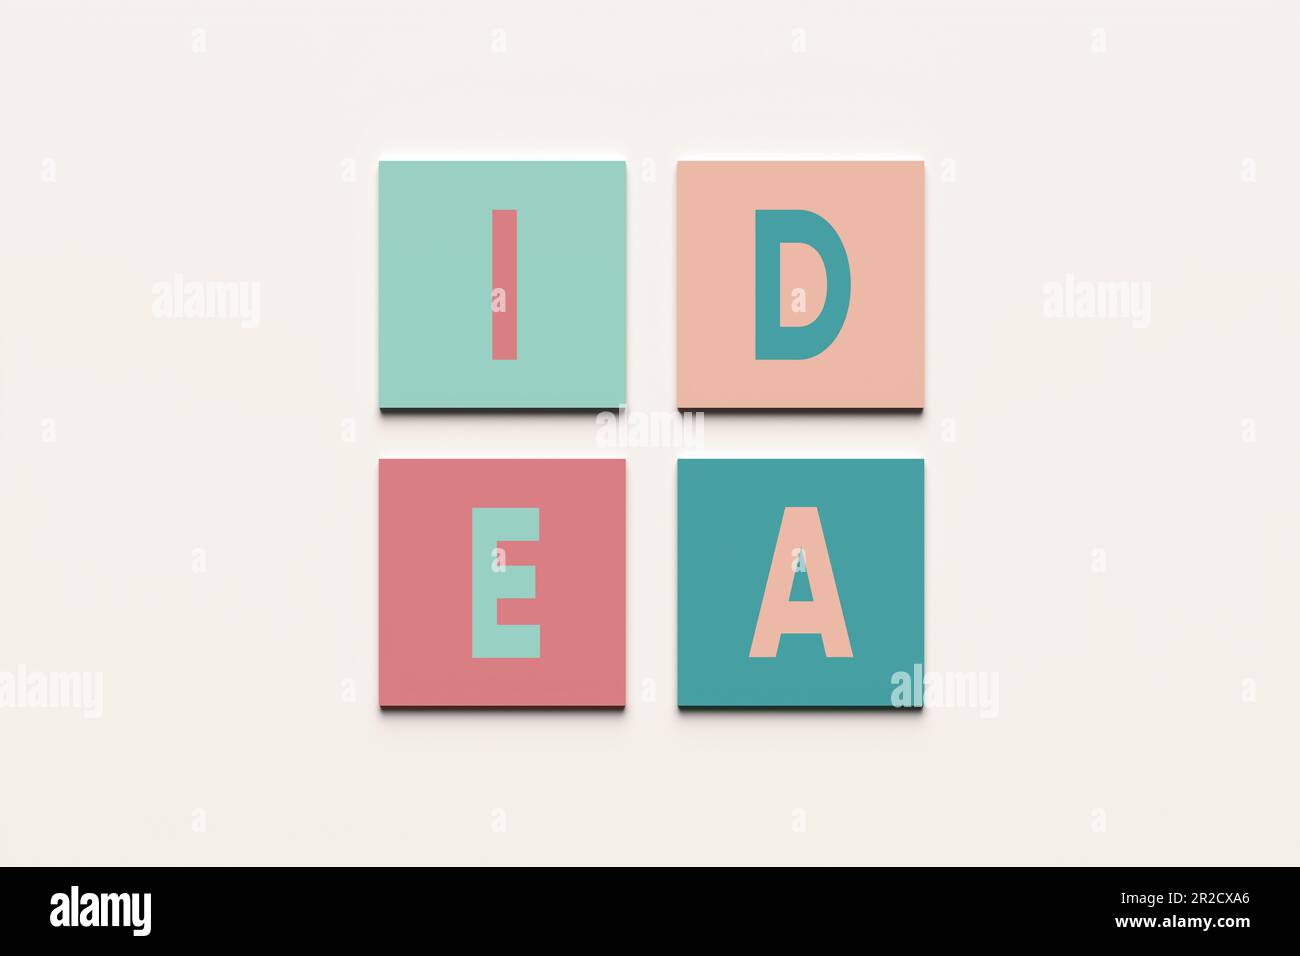 Creative idea generation, brainstorming and business solution concept. Teamwork and idea. The word idea on colorful square blocks. Stock Photo